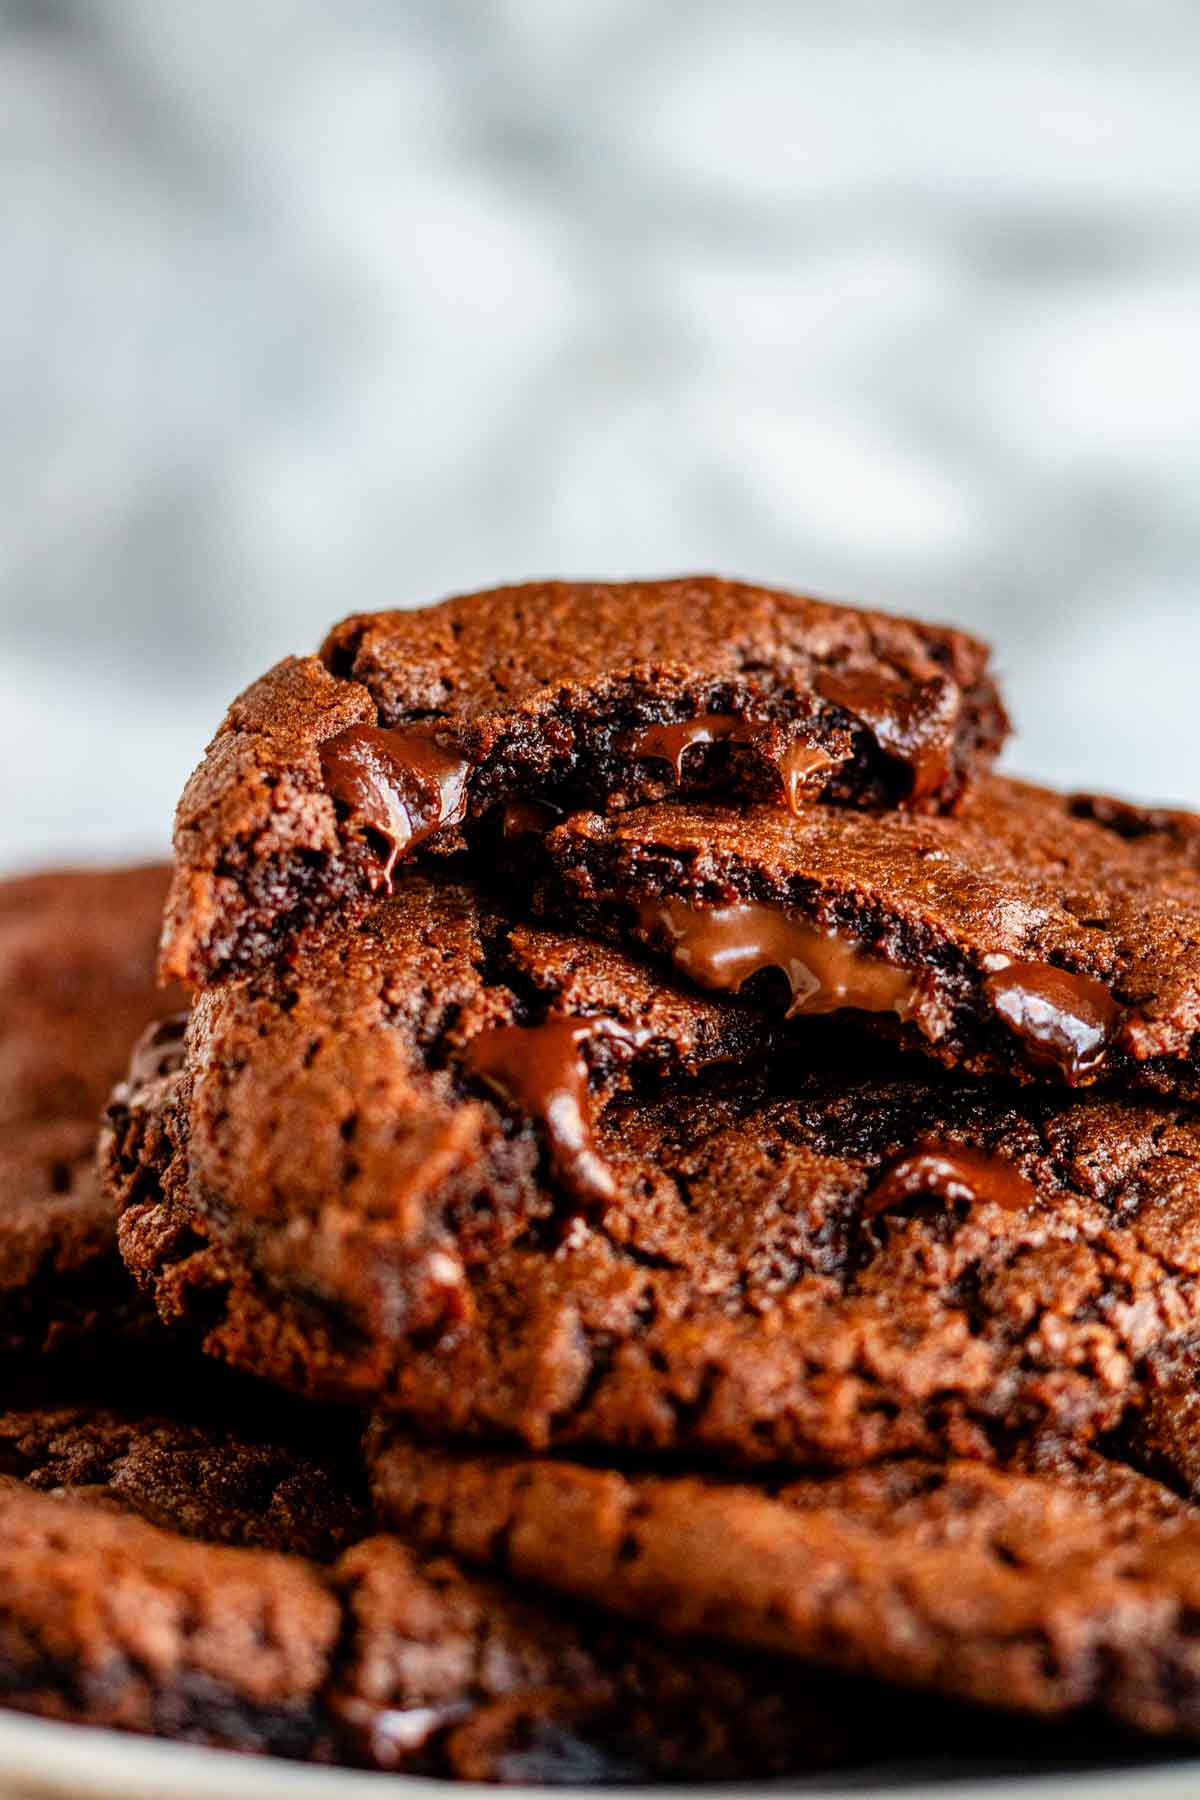 A plate of chocolate chocolate chip cookies with half cookies on the top and melted chocolate.